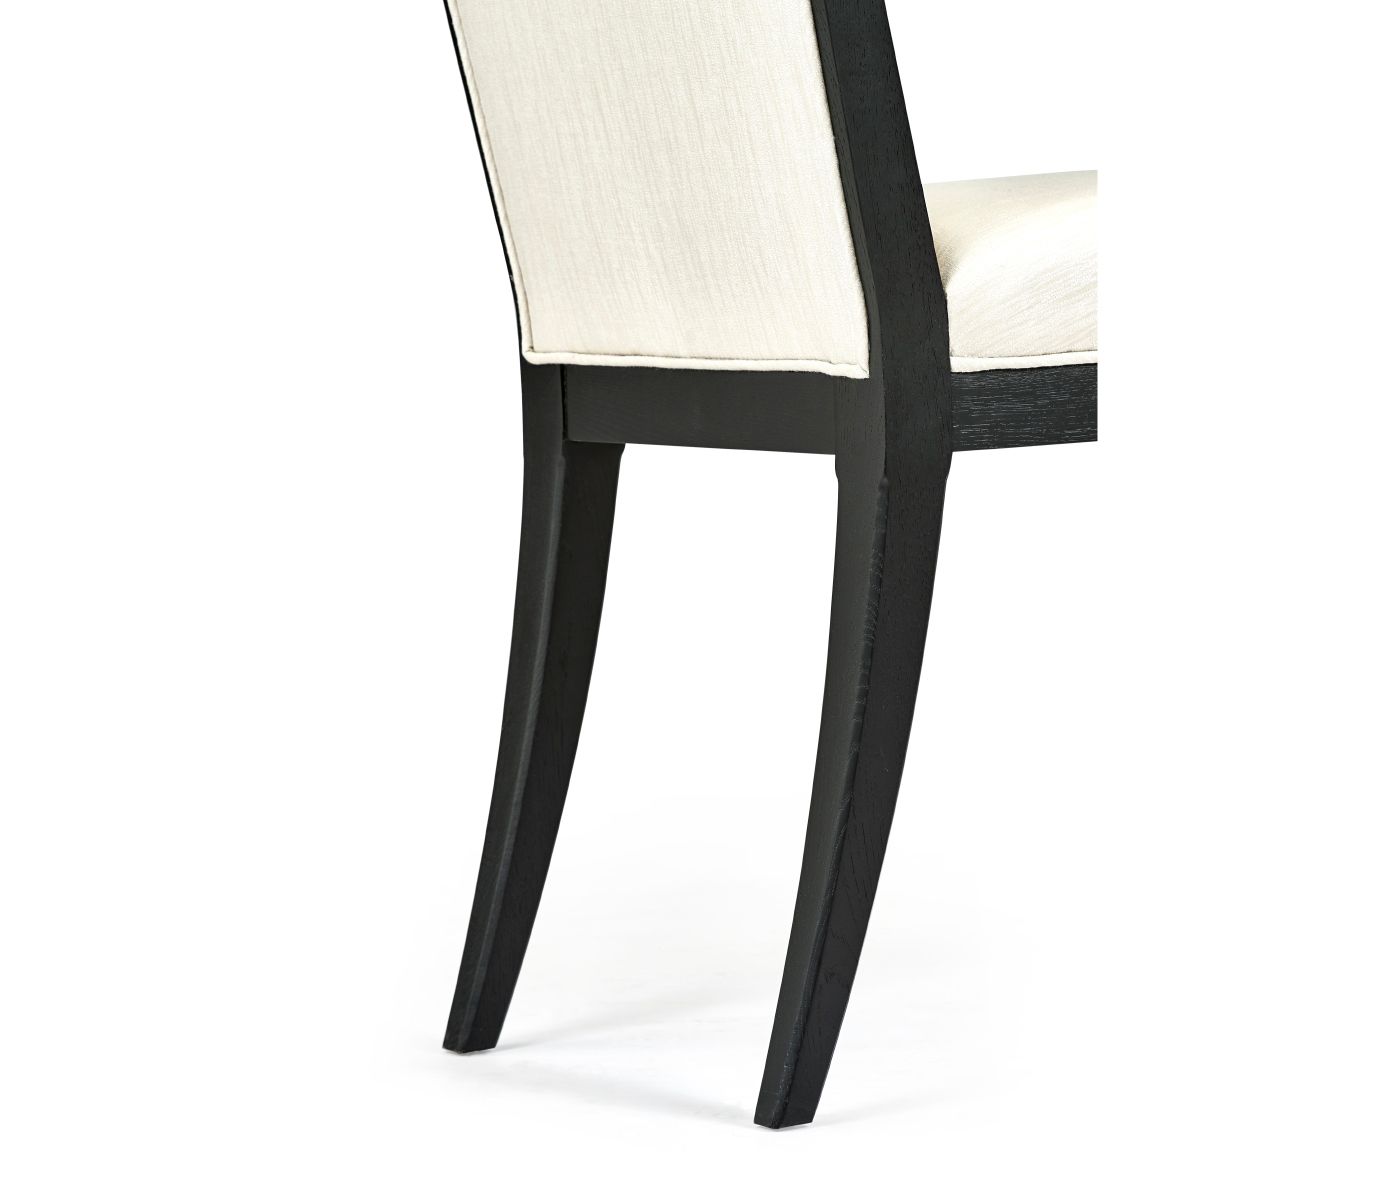 Load image into Gallery viewer, Ebonised Oak Dining Chair - Castaway
